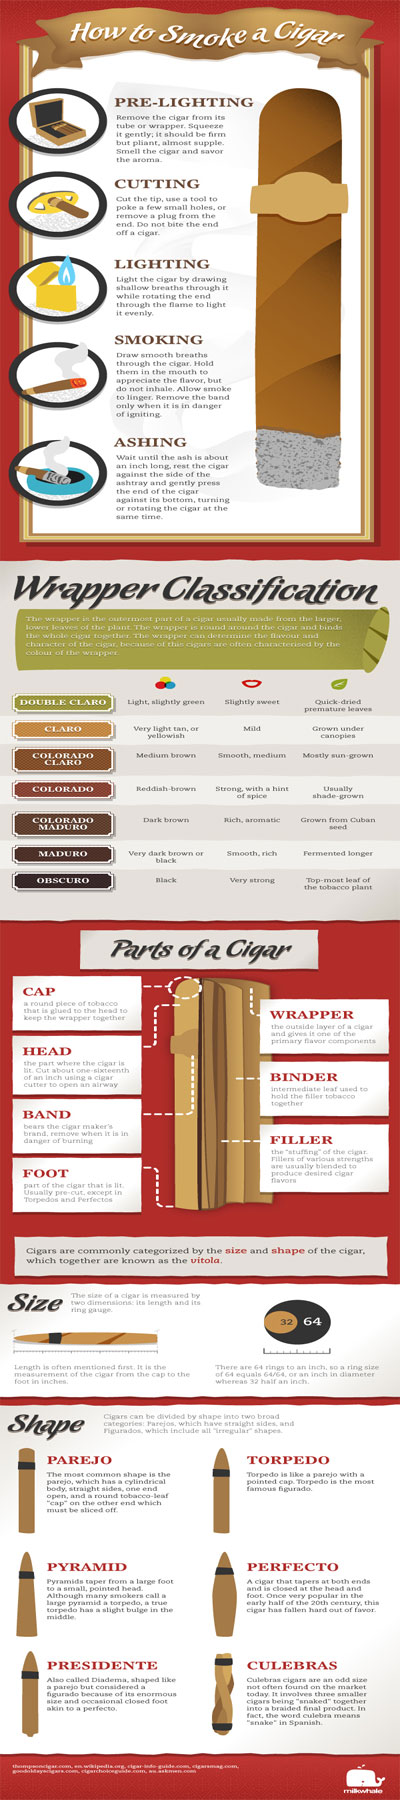 Thumbnail for How to Smoke a Cigar Infographic